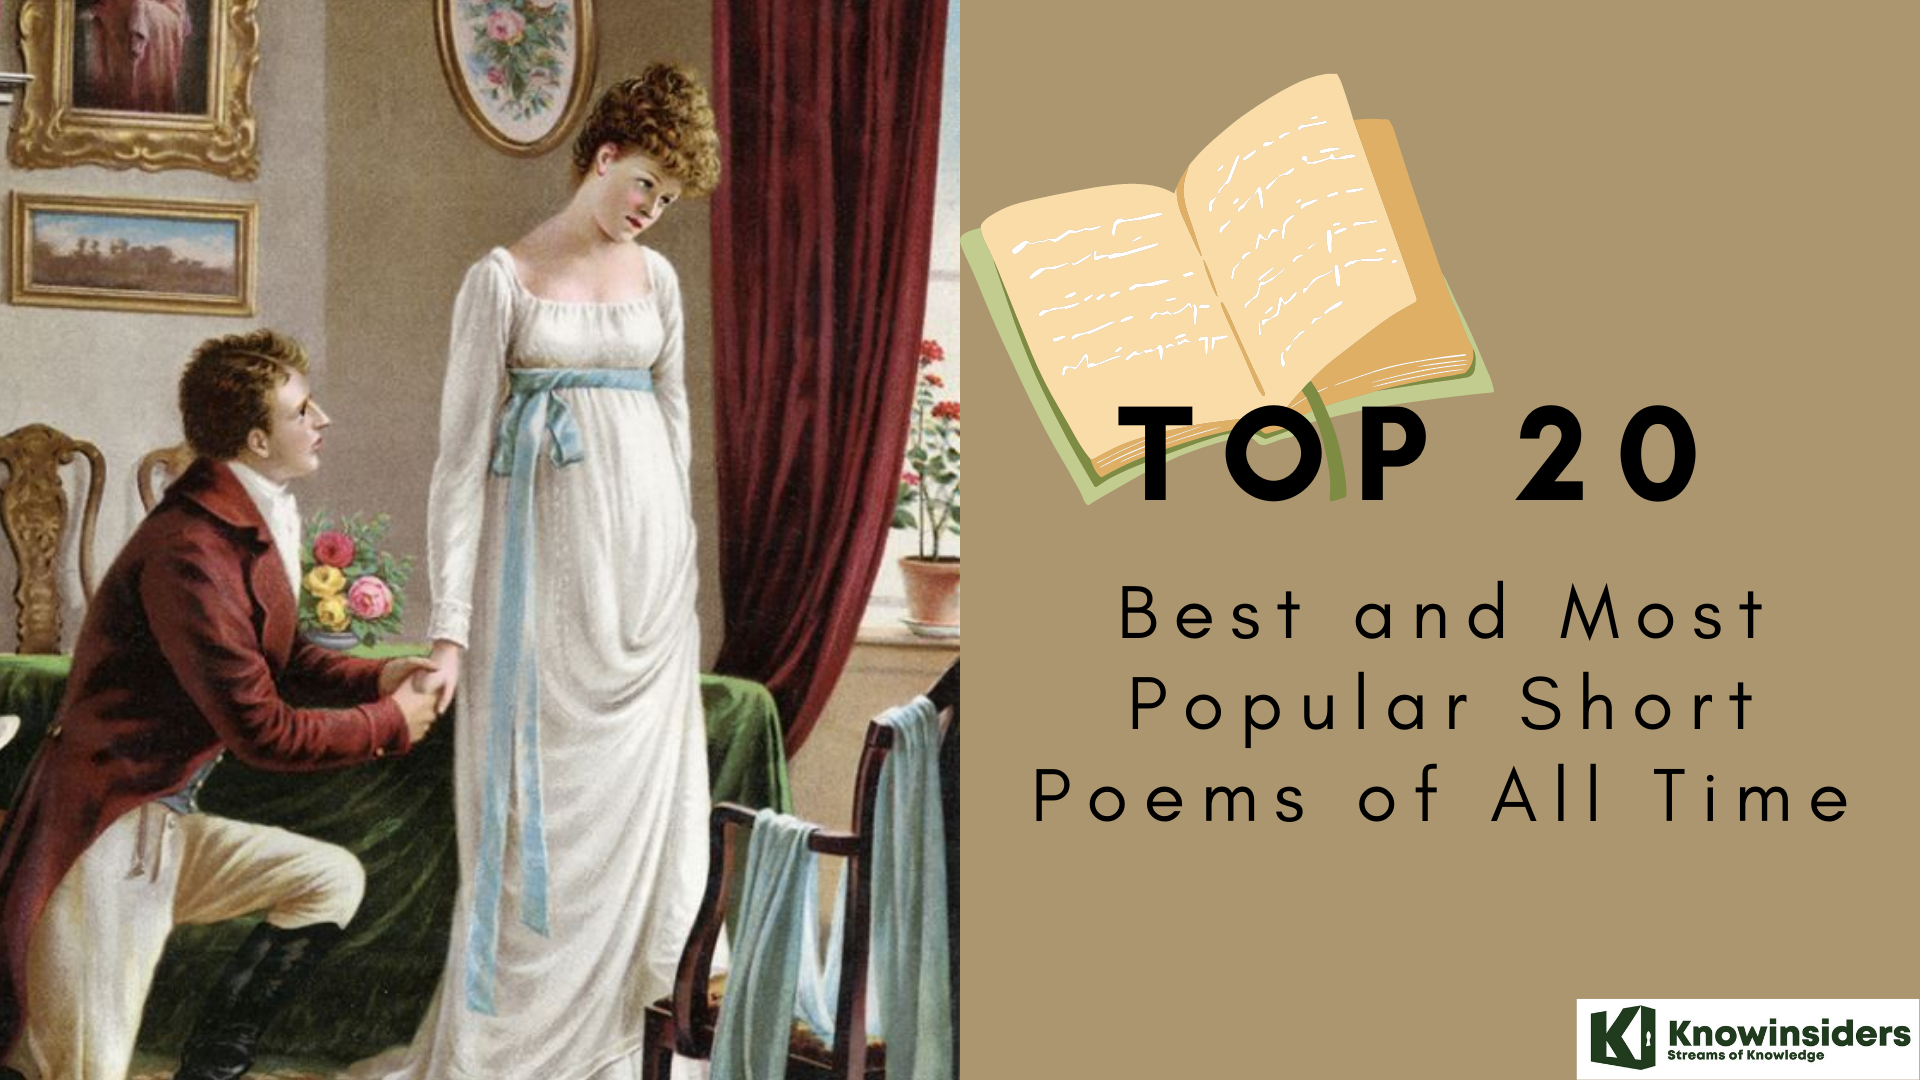 Top 20 Best and Most Popular Short Poems of All Time